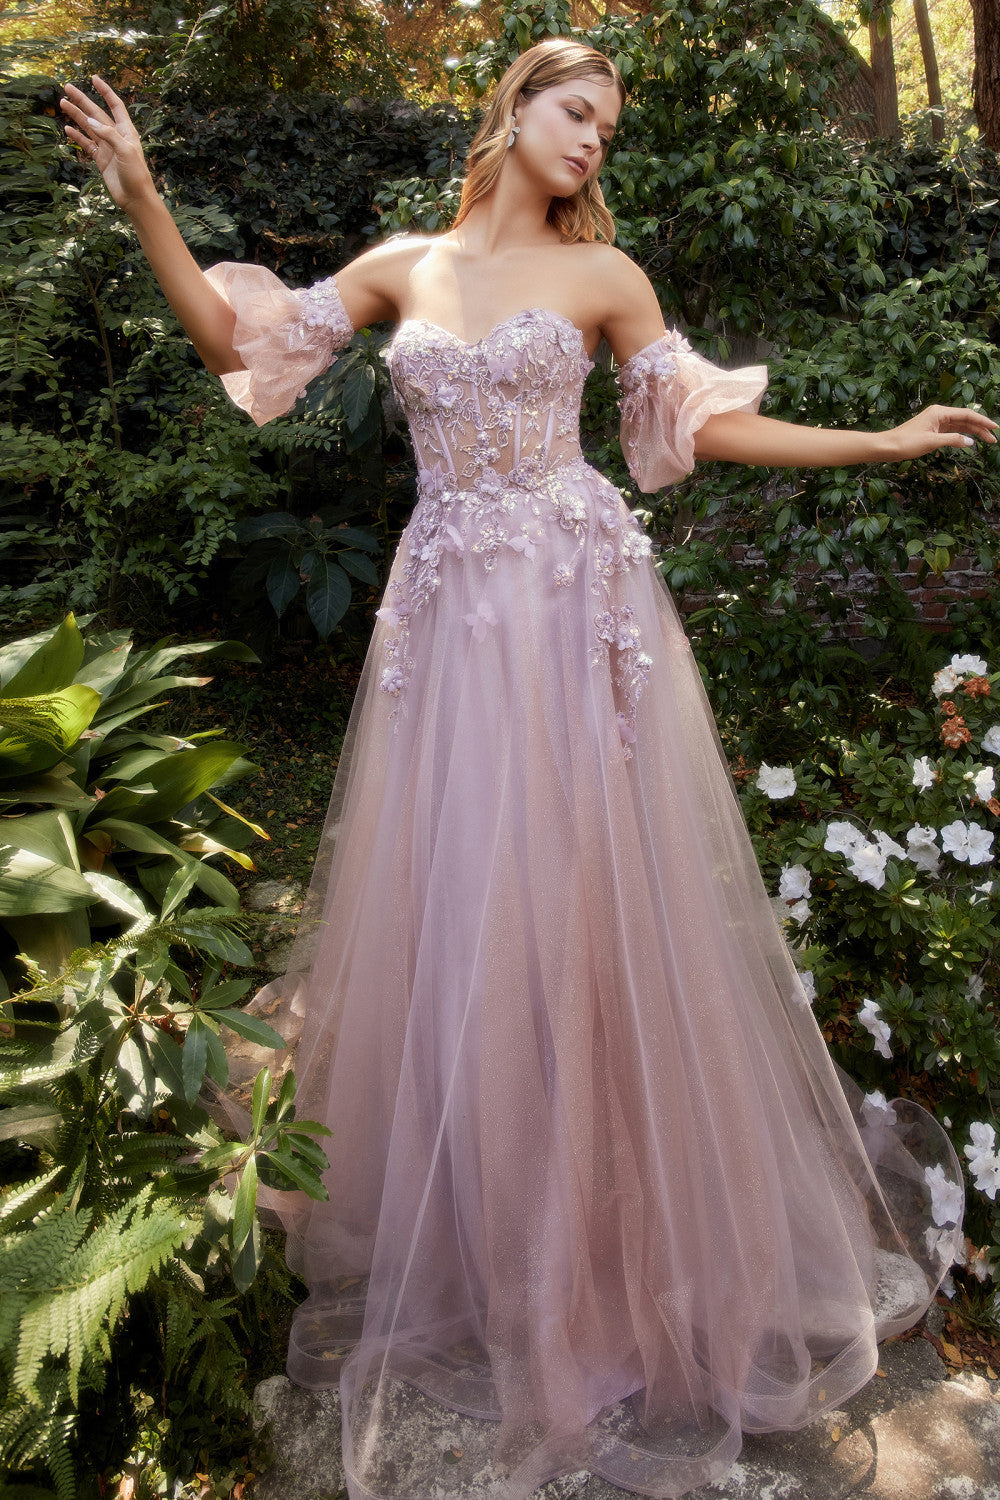 Floral Strapless Ball Gown by Andrea & Leo Couture A1108 Penelope Gown - Special Occasion